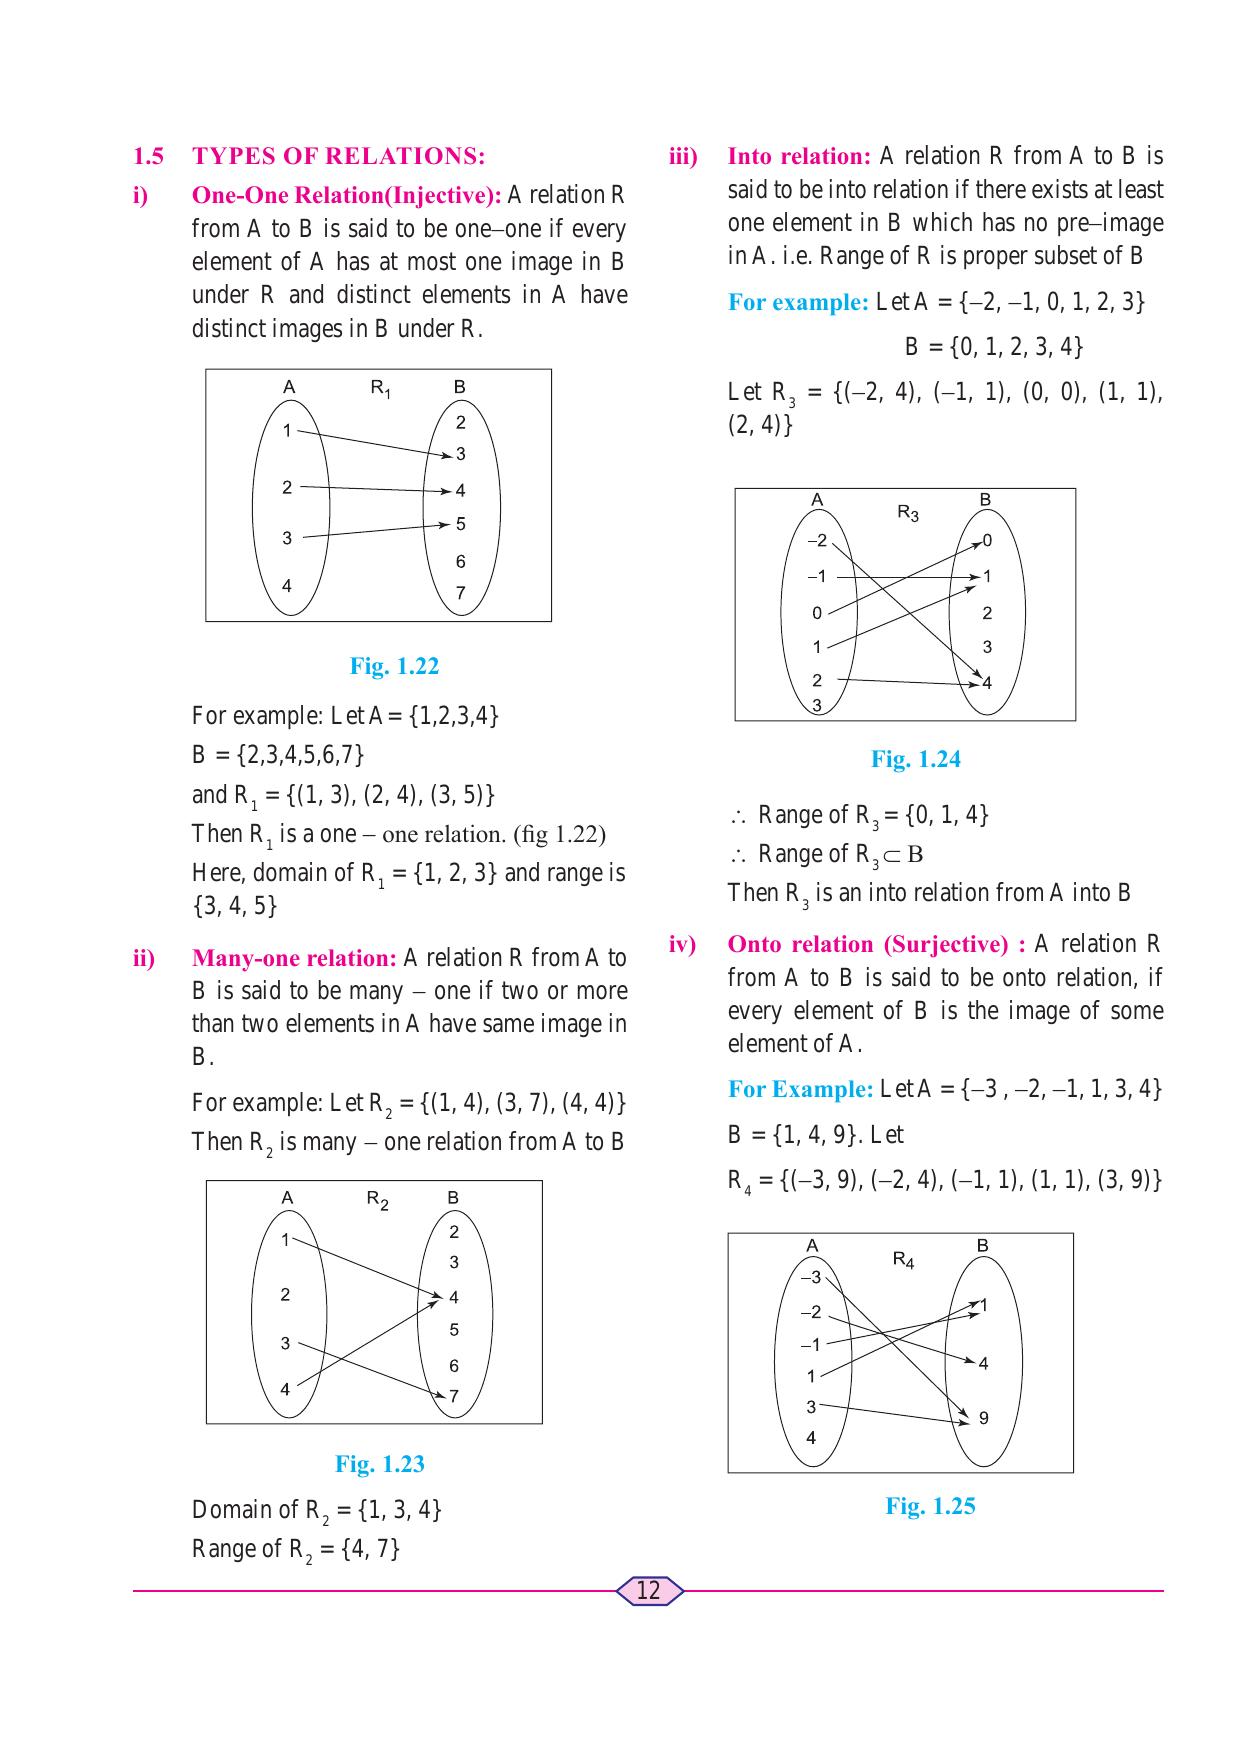 Maharashtra Board Class 11 Maths (Commerce) (Part 1) Textbook - Page 22